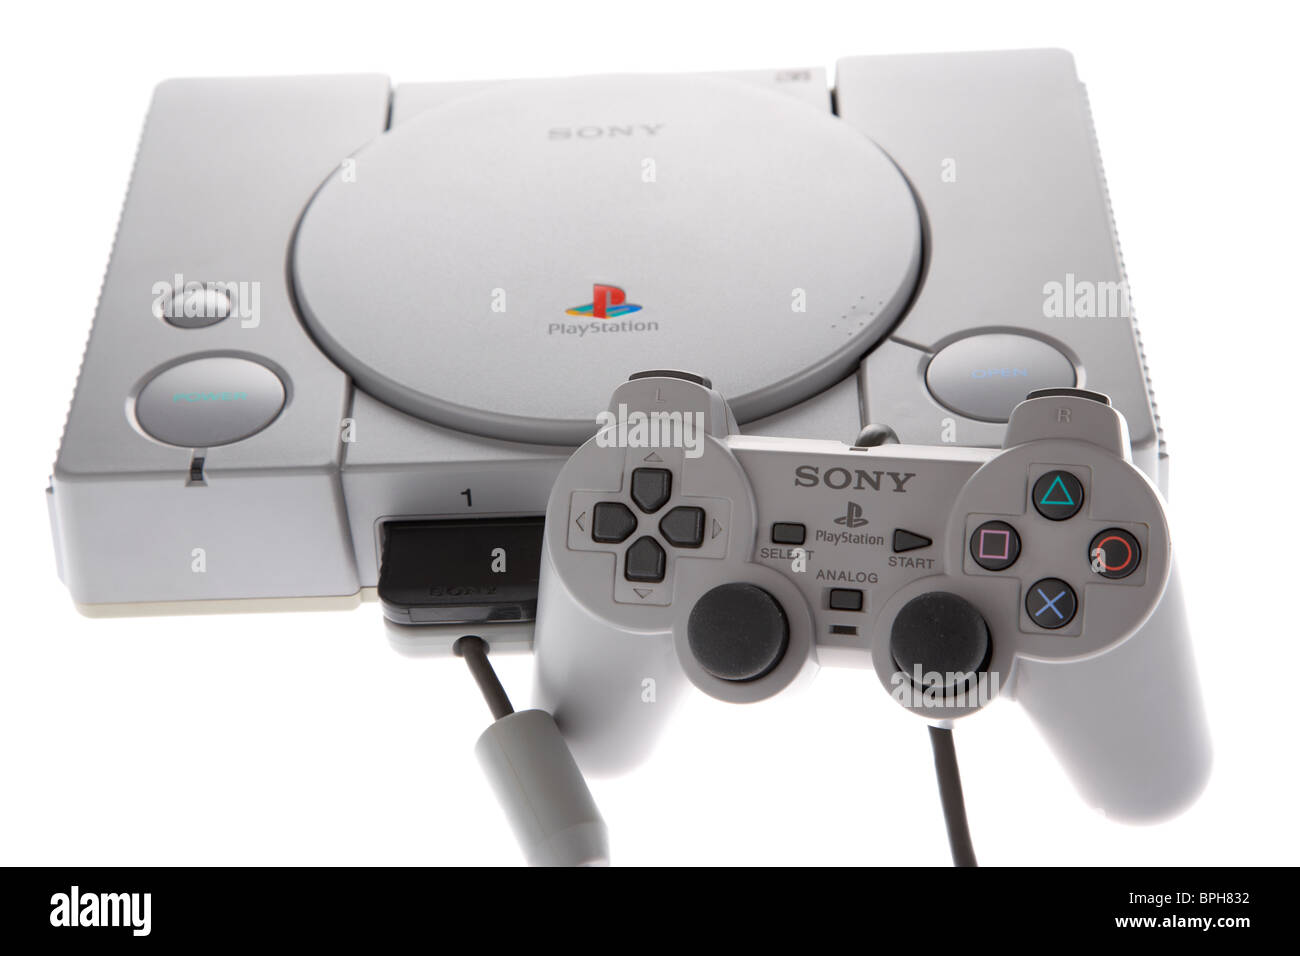 1,911 Playstation Stock Video Footage - 4K and HD Video Clips